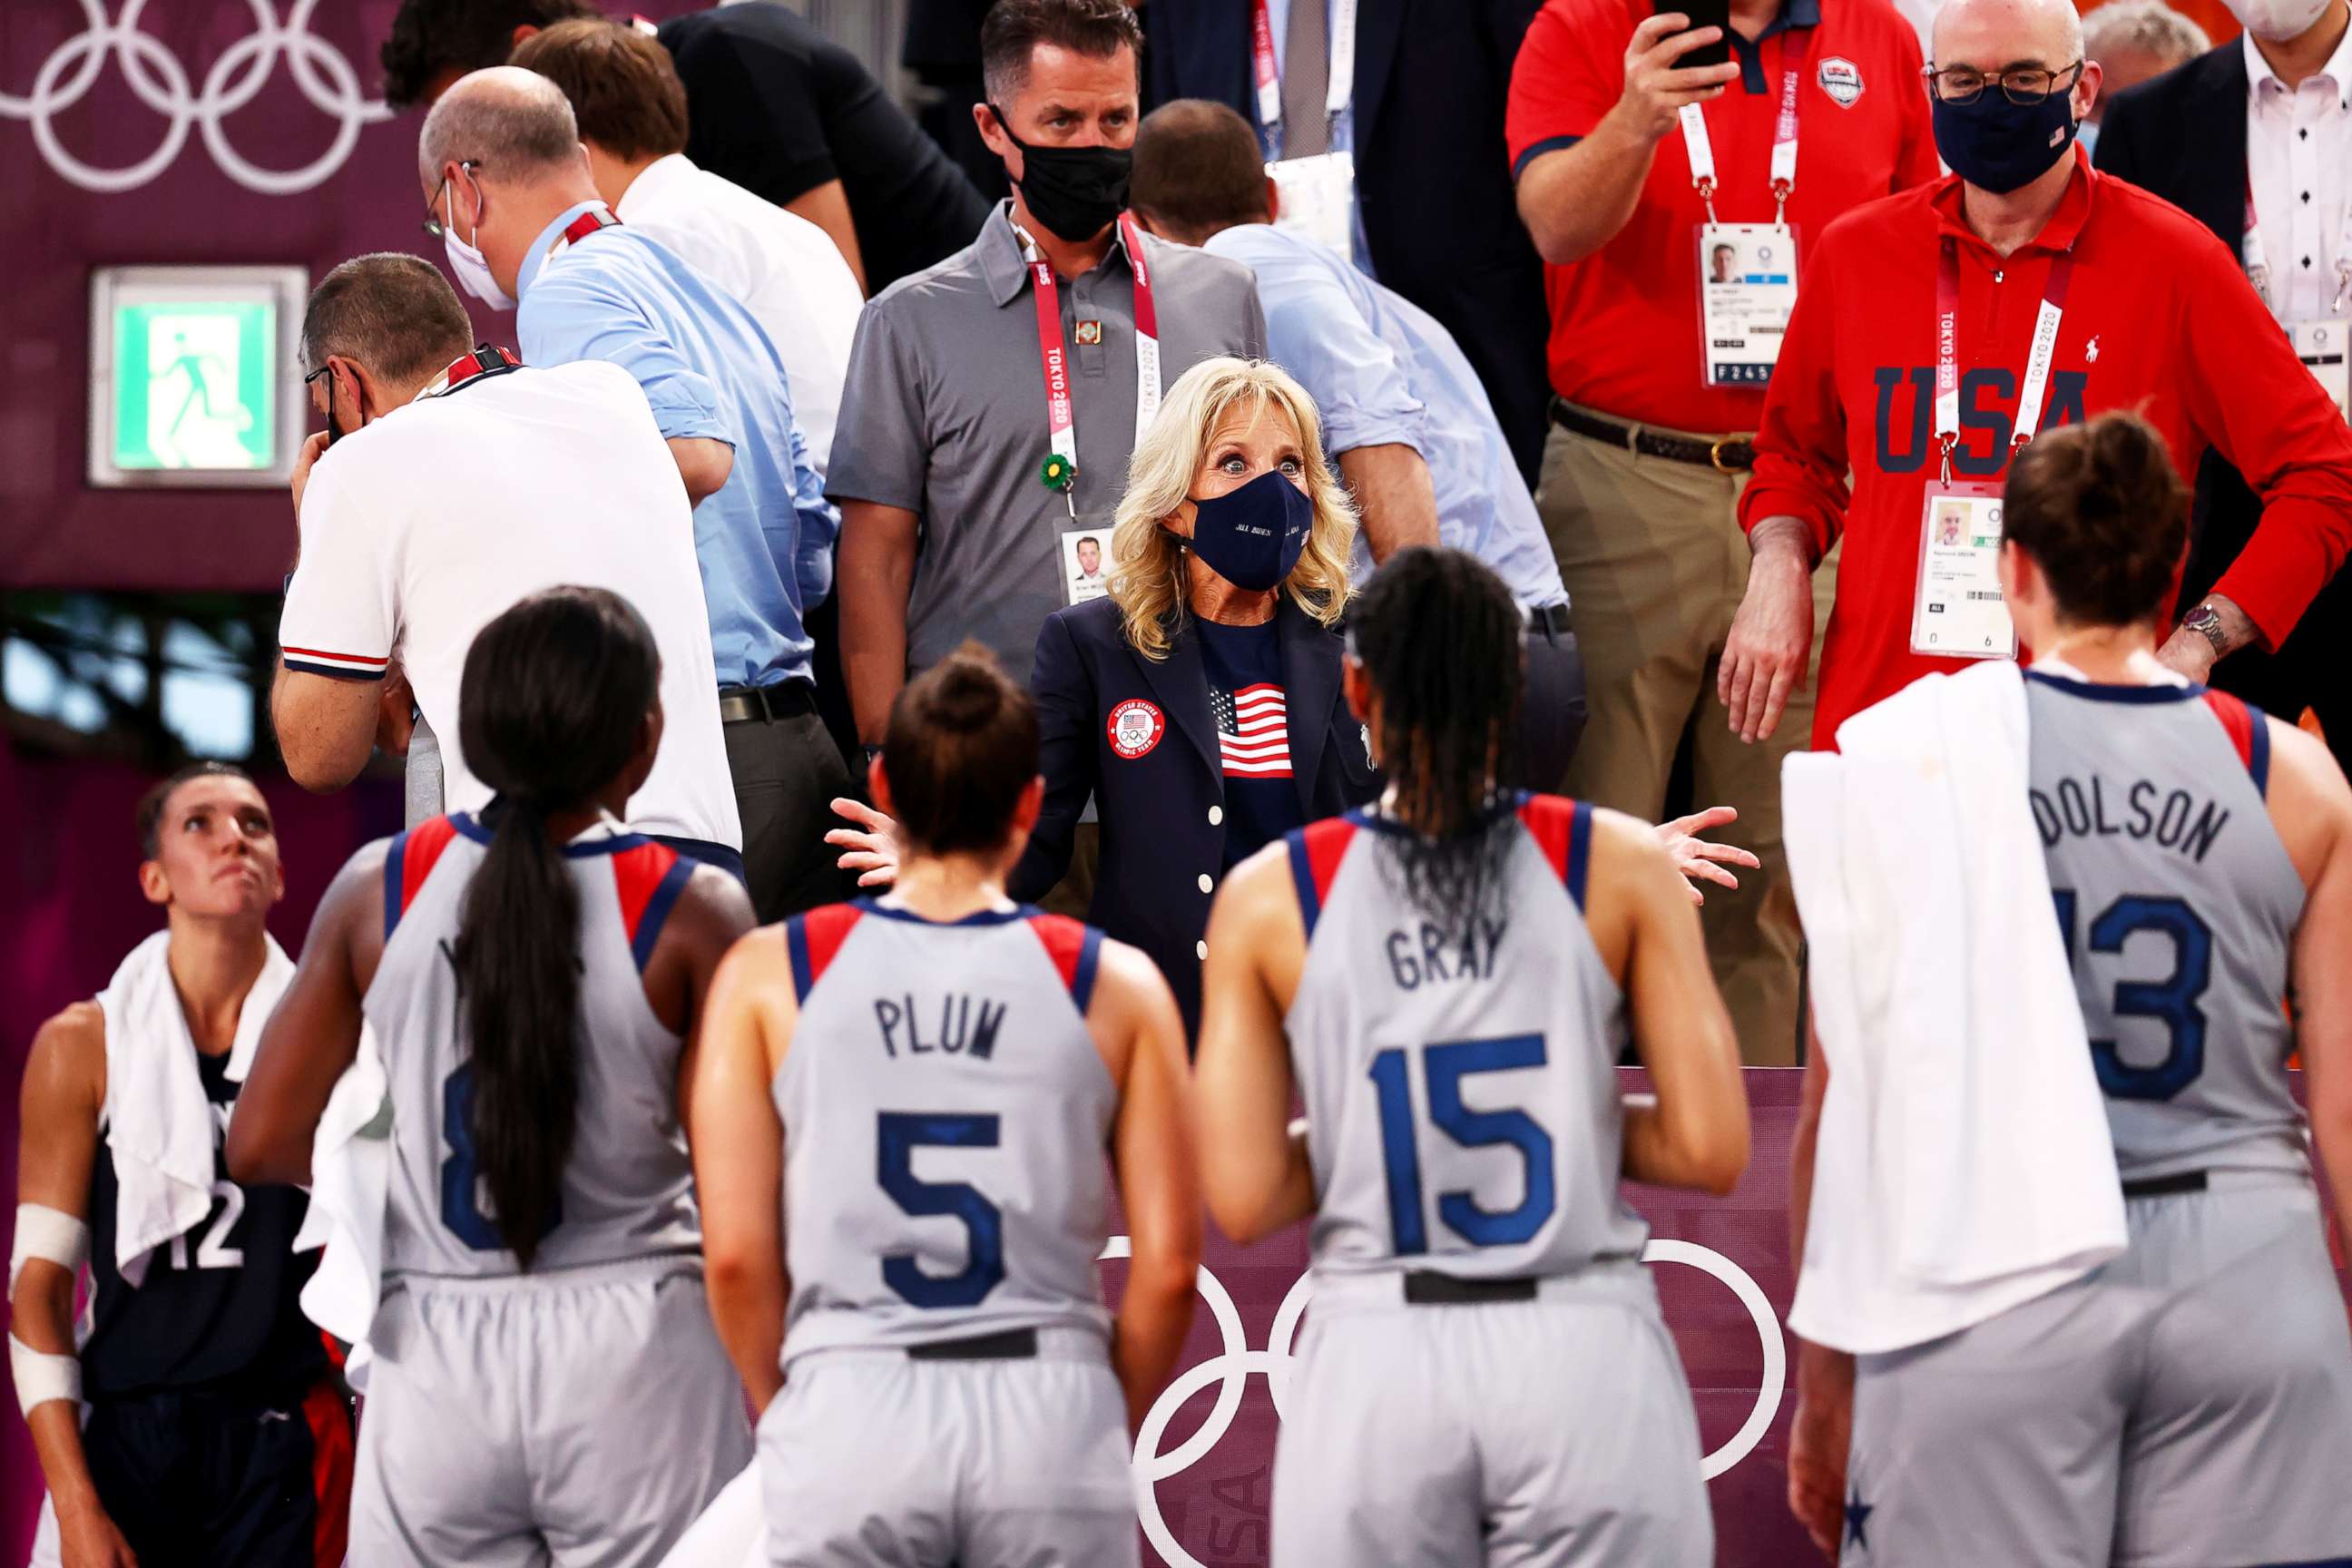 PHOTO: First Lady Jill Biden talks with players from the U.S. basketball team during the Olympic Games in Tokyo, July 24, 2021.